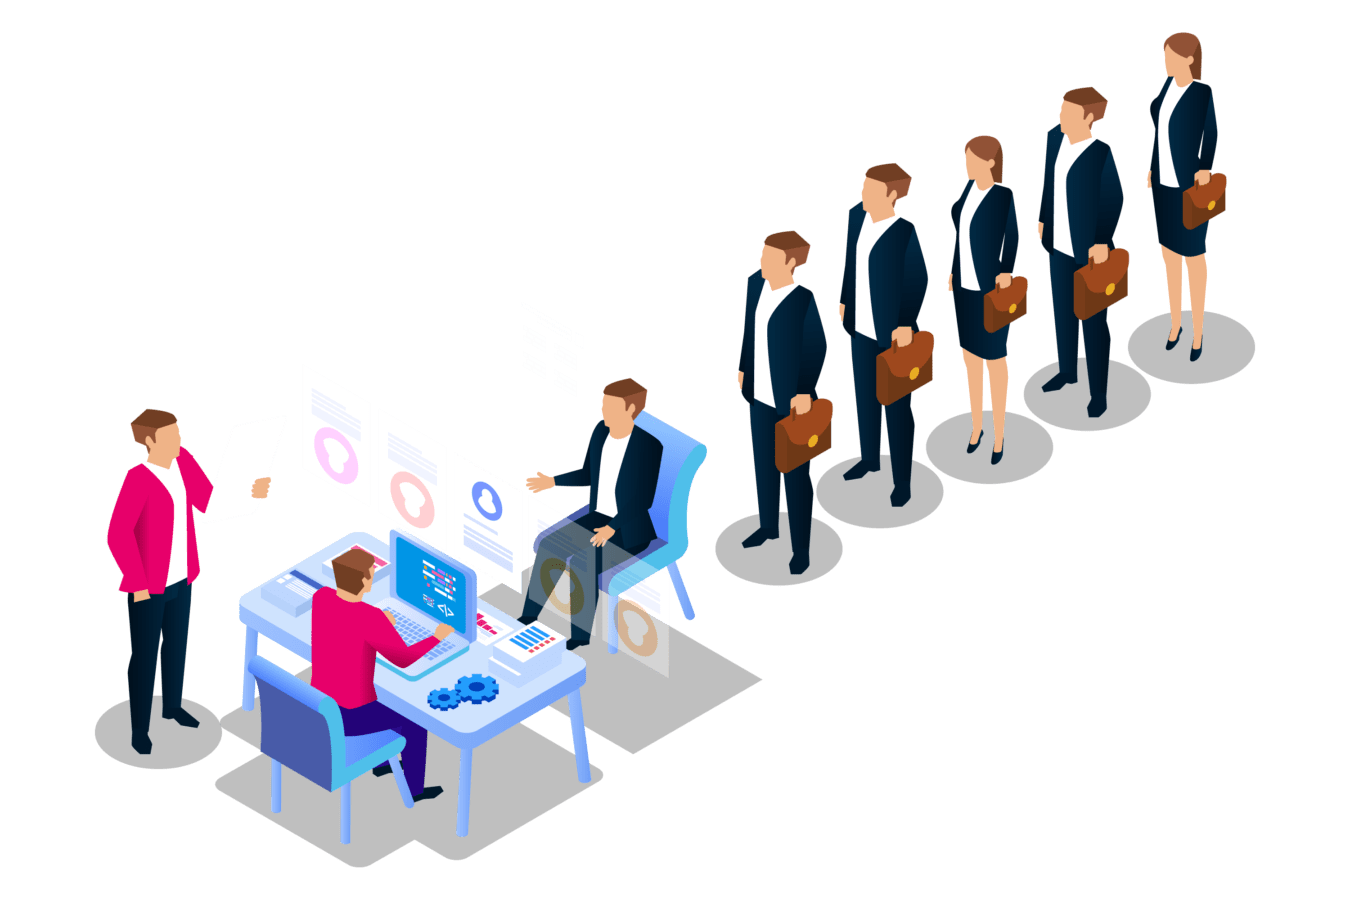 Illustration of a queue of business people waiting to speak to a man sitting at his desk with a computer